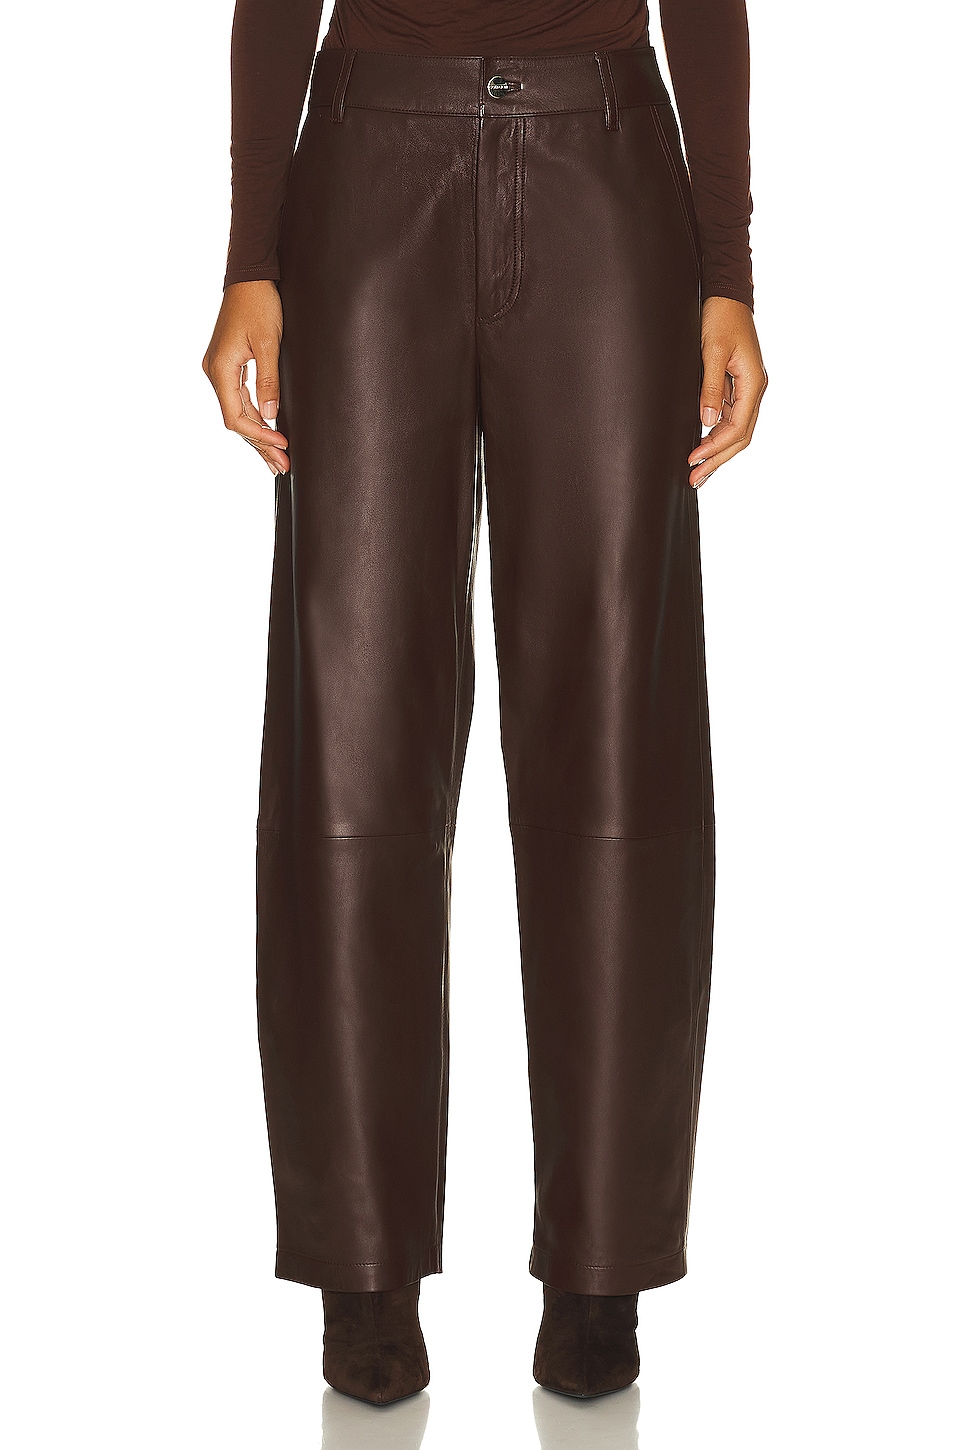 Image 1 of GOLDSIGN Trey Leather Trouser in Maderia